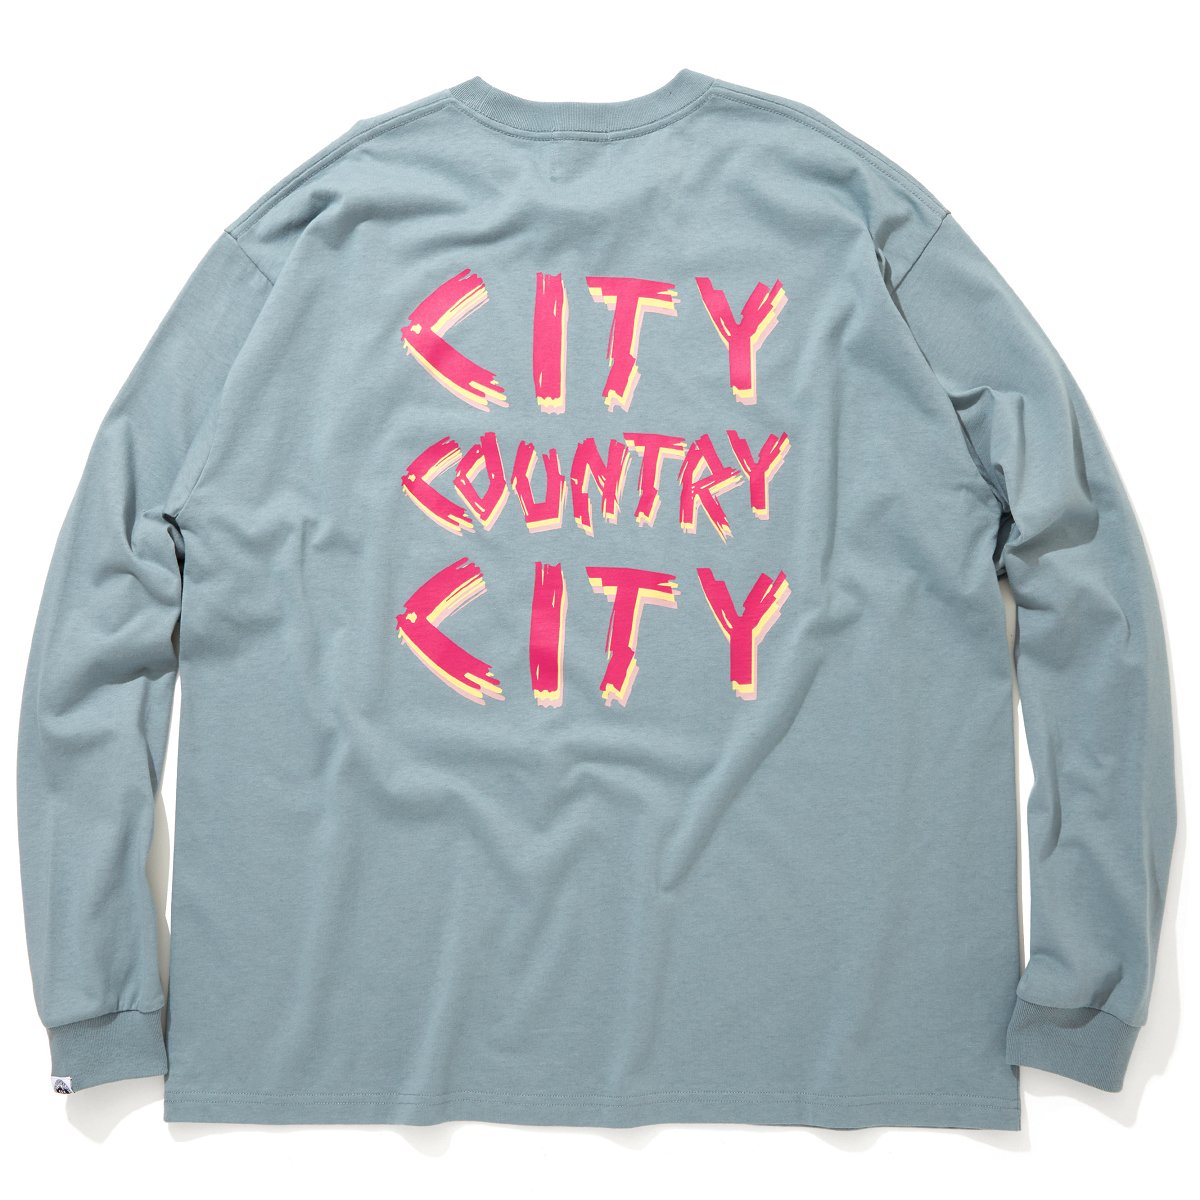 CITY COUNTRY CITY<BR>COTTON L/S T-SHIRT"CITY COUNTRY CITY"(DEEP BLUE)